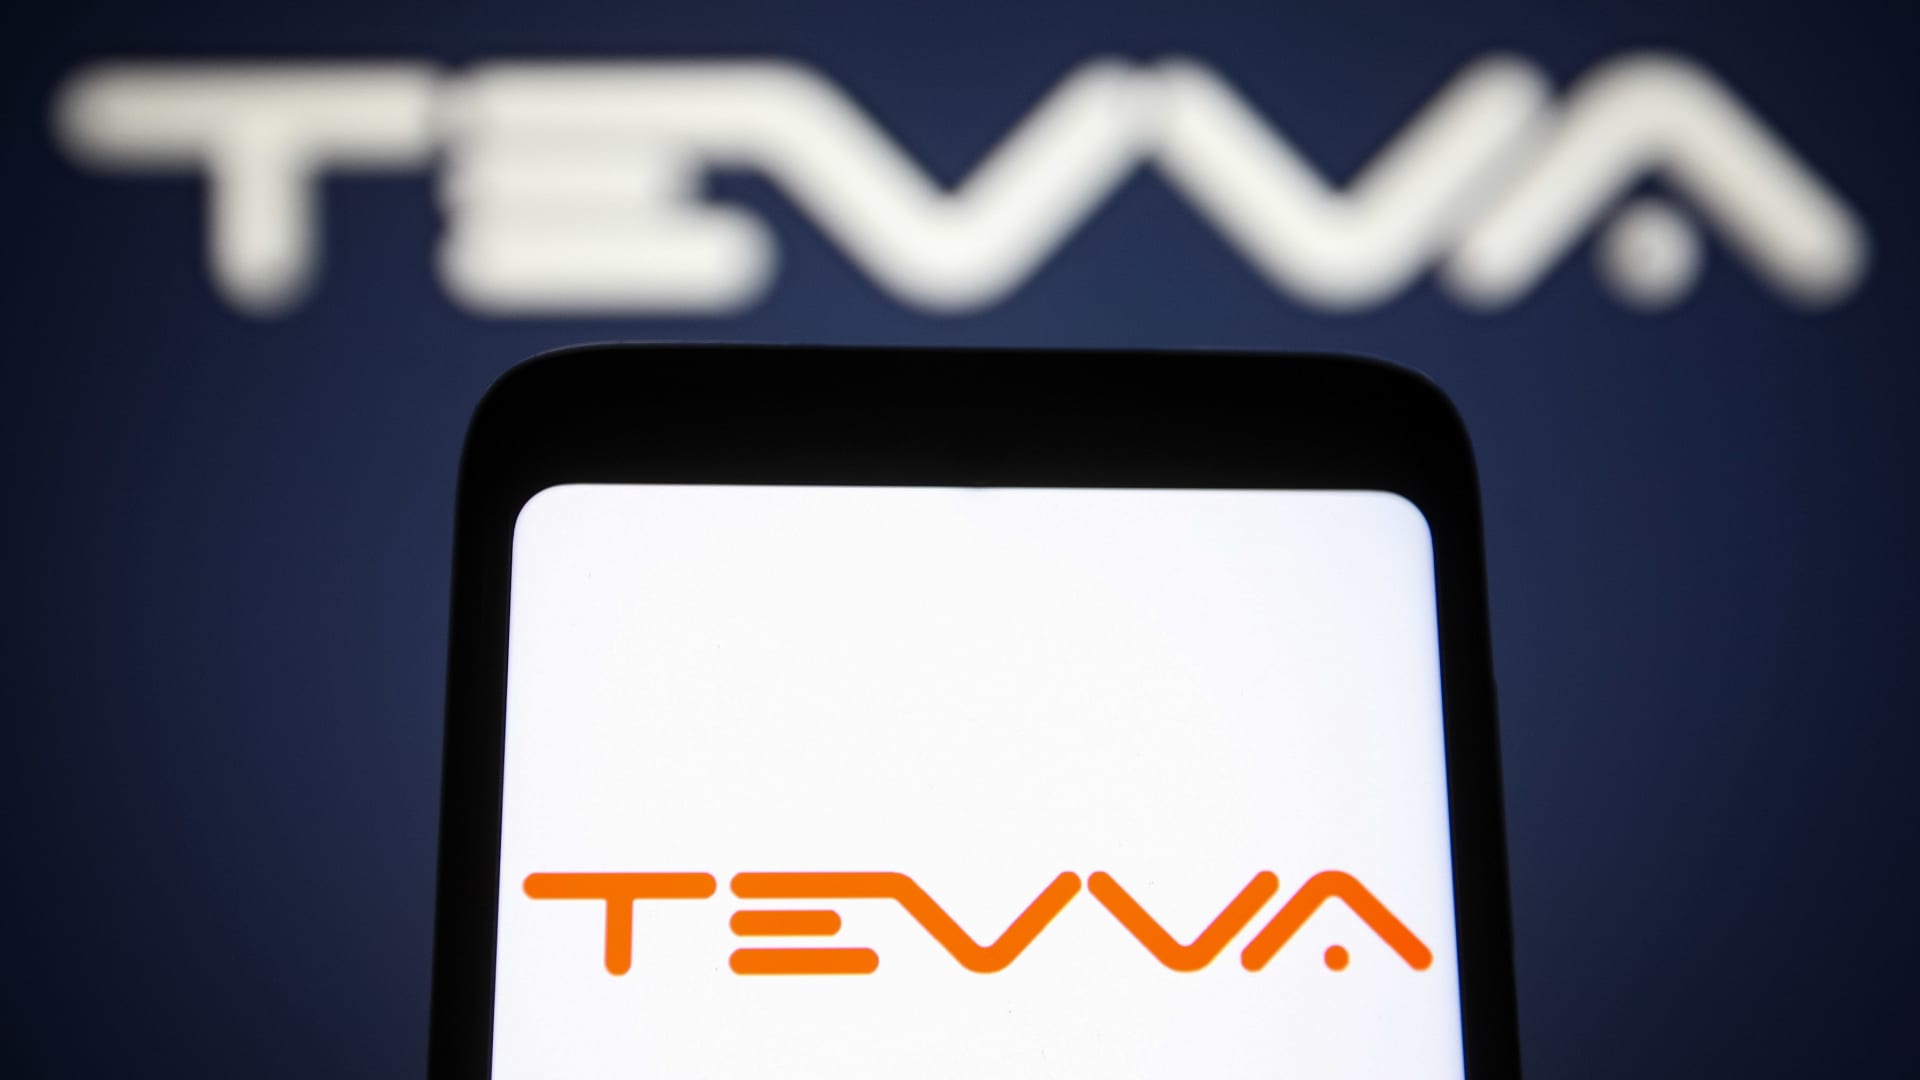 UK-based startup Tevva launches hydrogen-electric truck